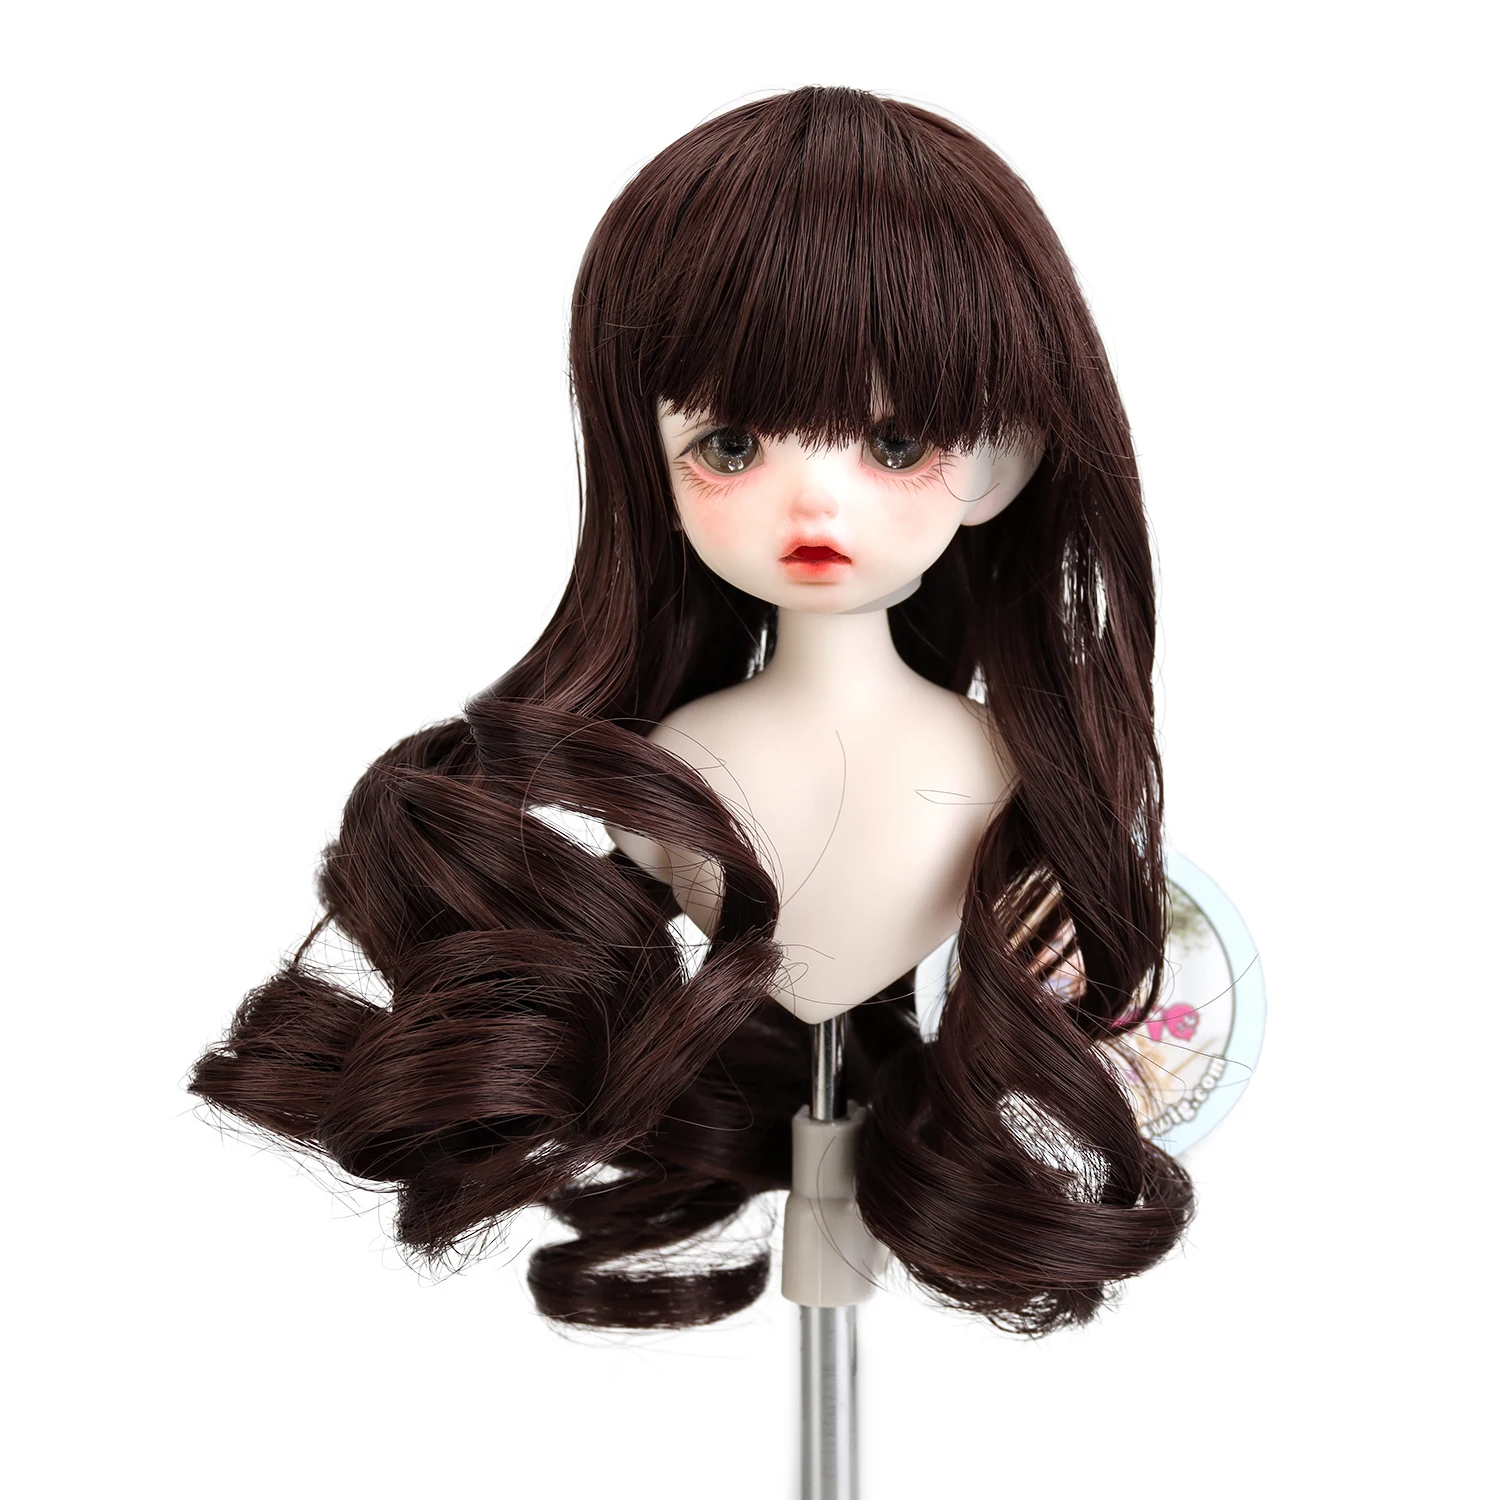 1/6 BJD Doll Wigs 6-7'' Long Curly Natural Color With Bangs MSD DIY Doll Make Accessories Doll Tress Wig Hair 1 3 bjd wigs long curly dark blonde with bangs dolls make synthetic fiber hair for dollfie dream dolls 8 9 ddh hair diy